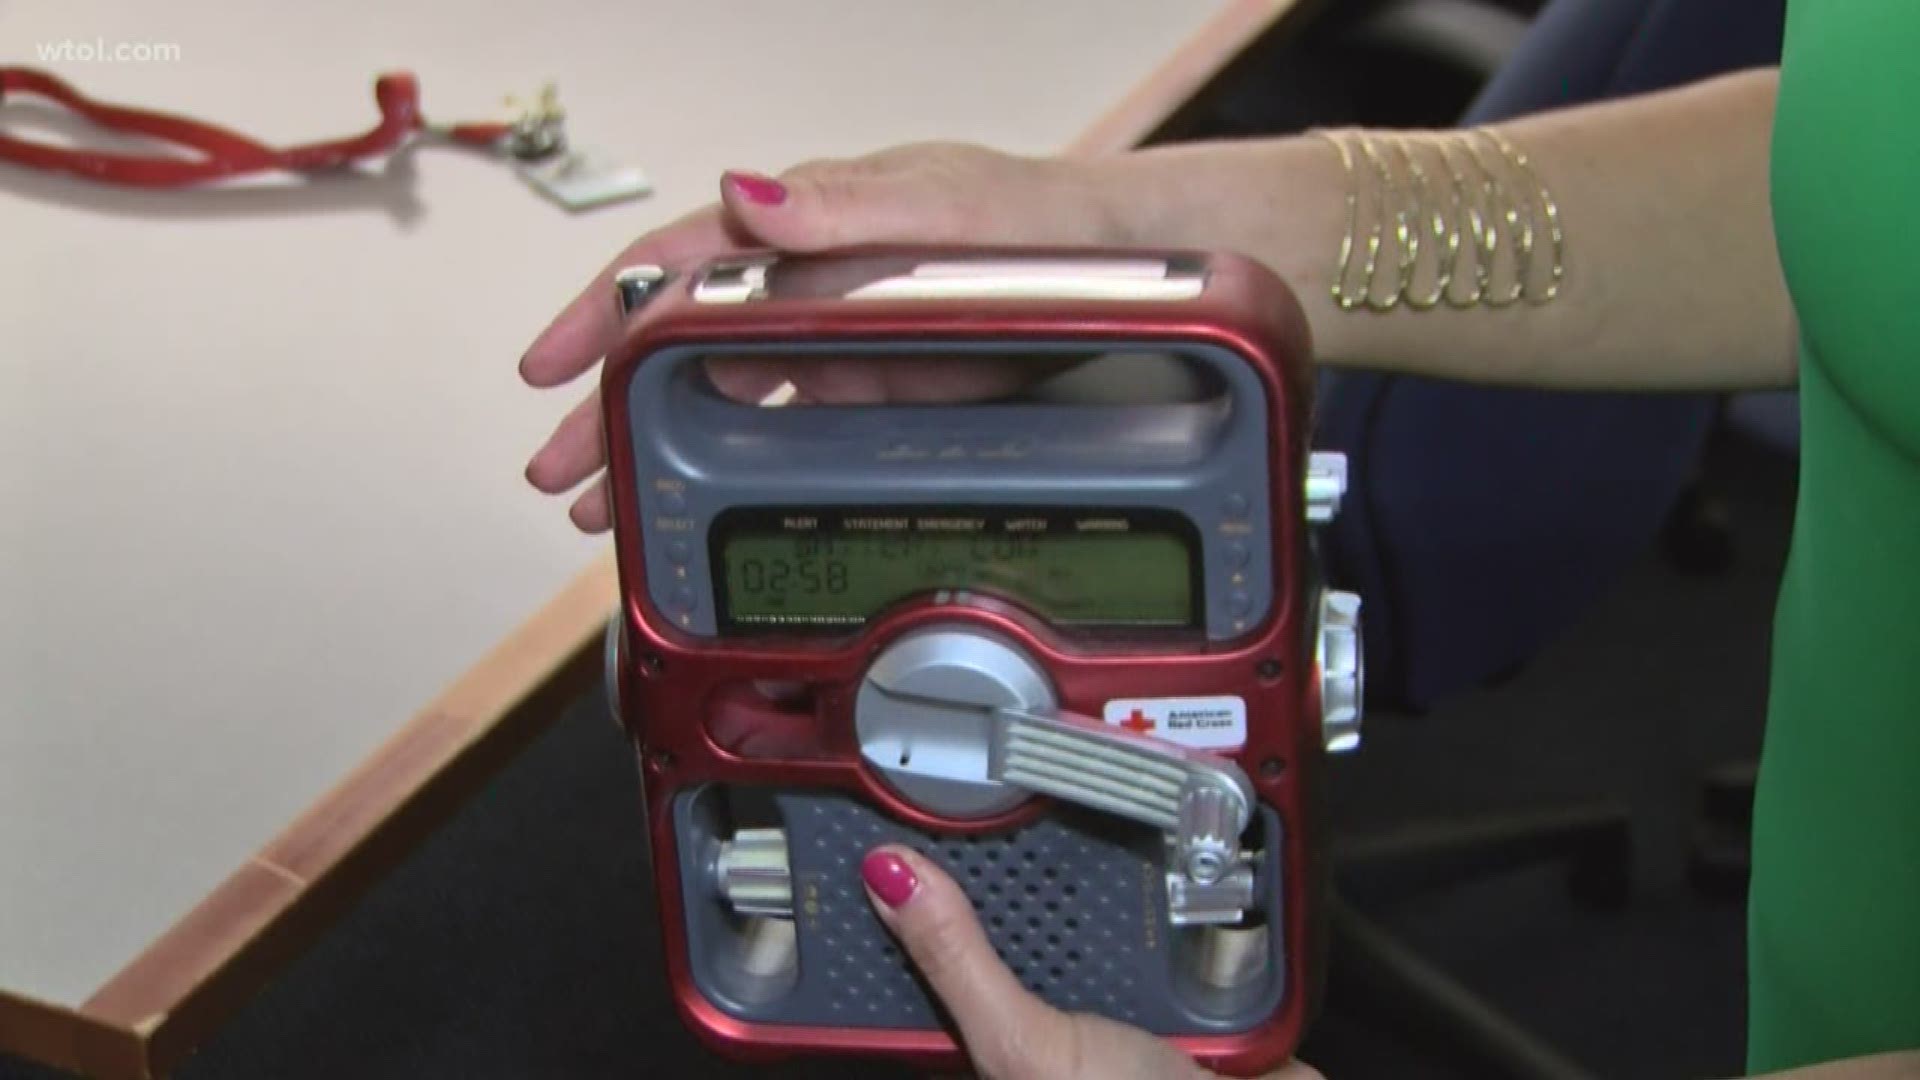 According to the Red Cross, people should pack a go-kit with essential items in case severe weather strikes.